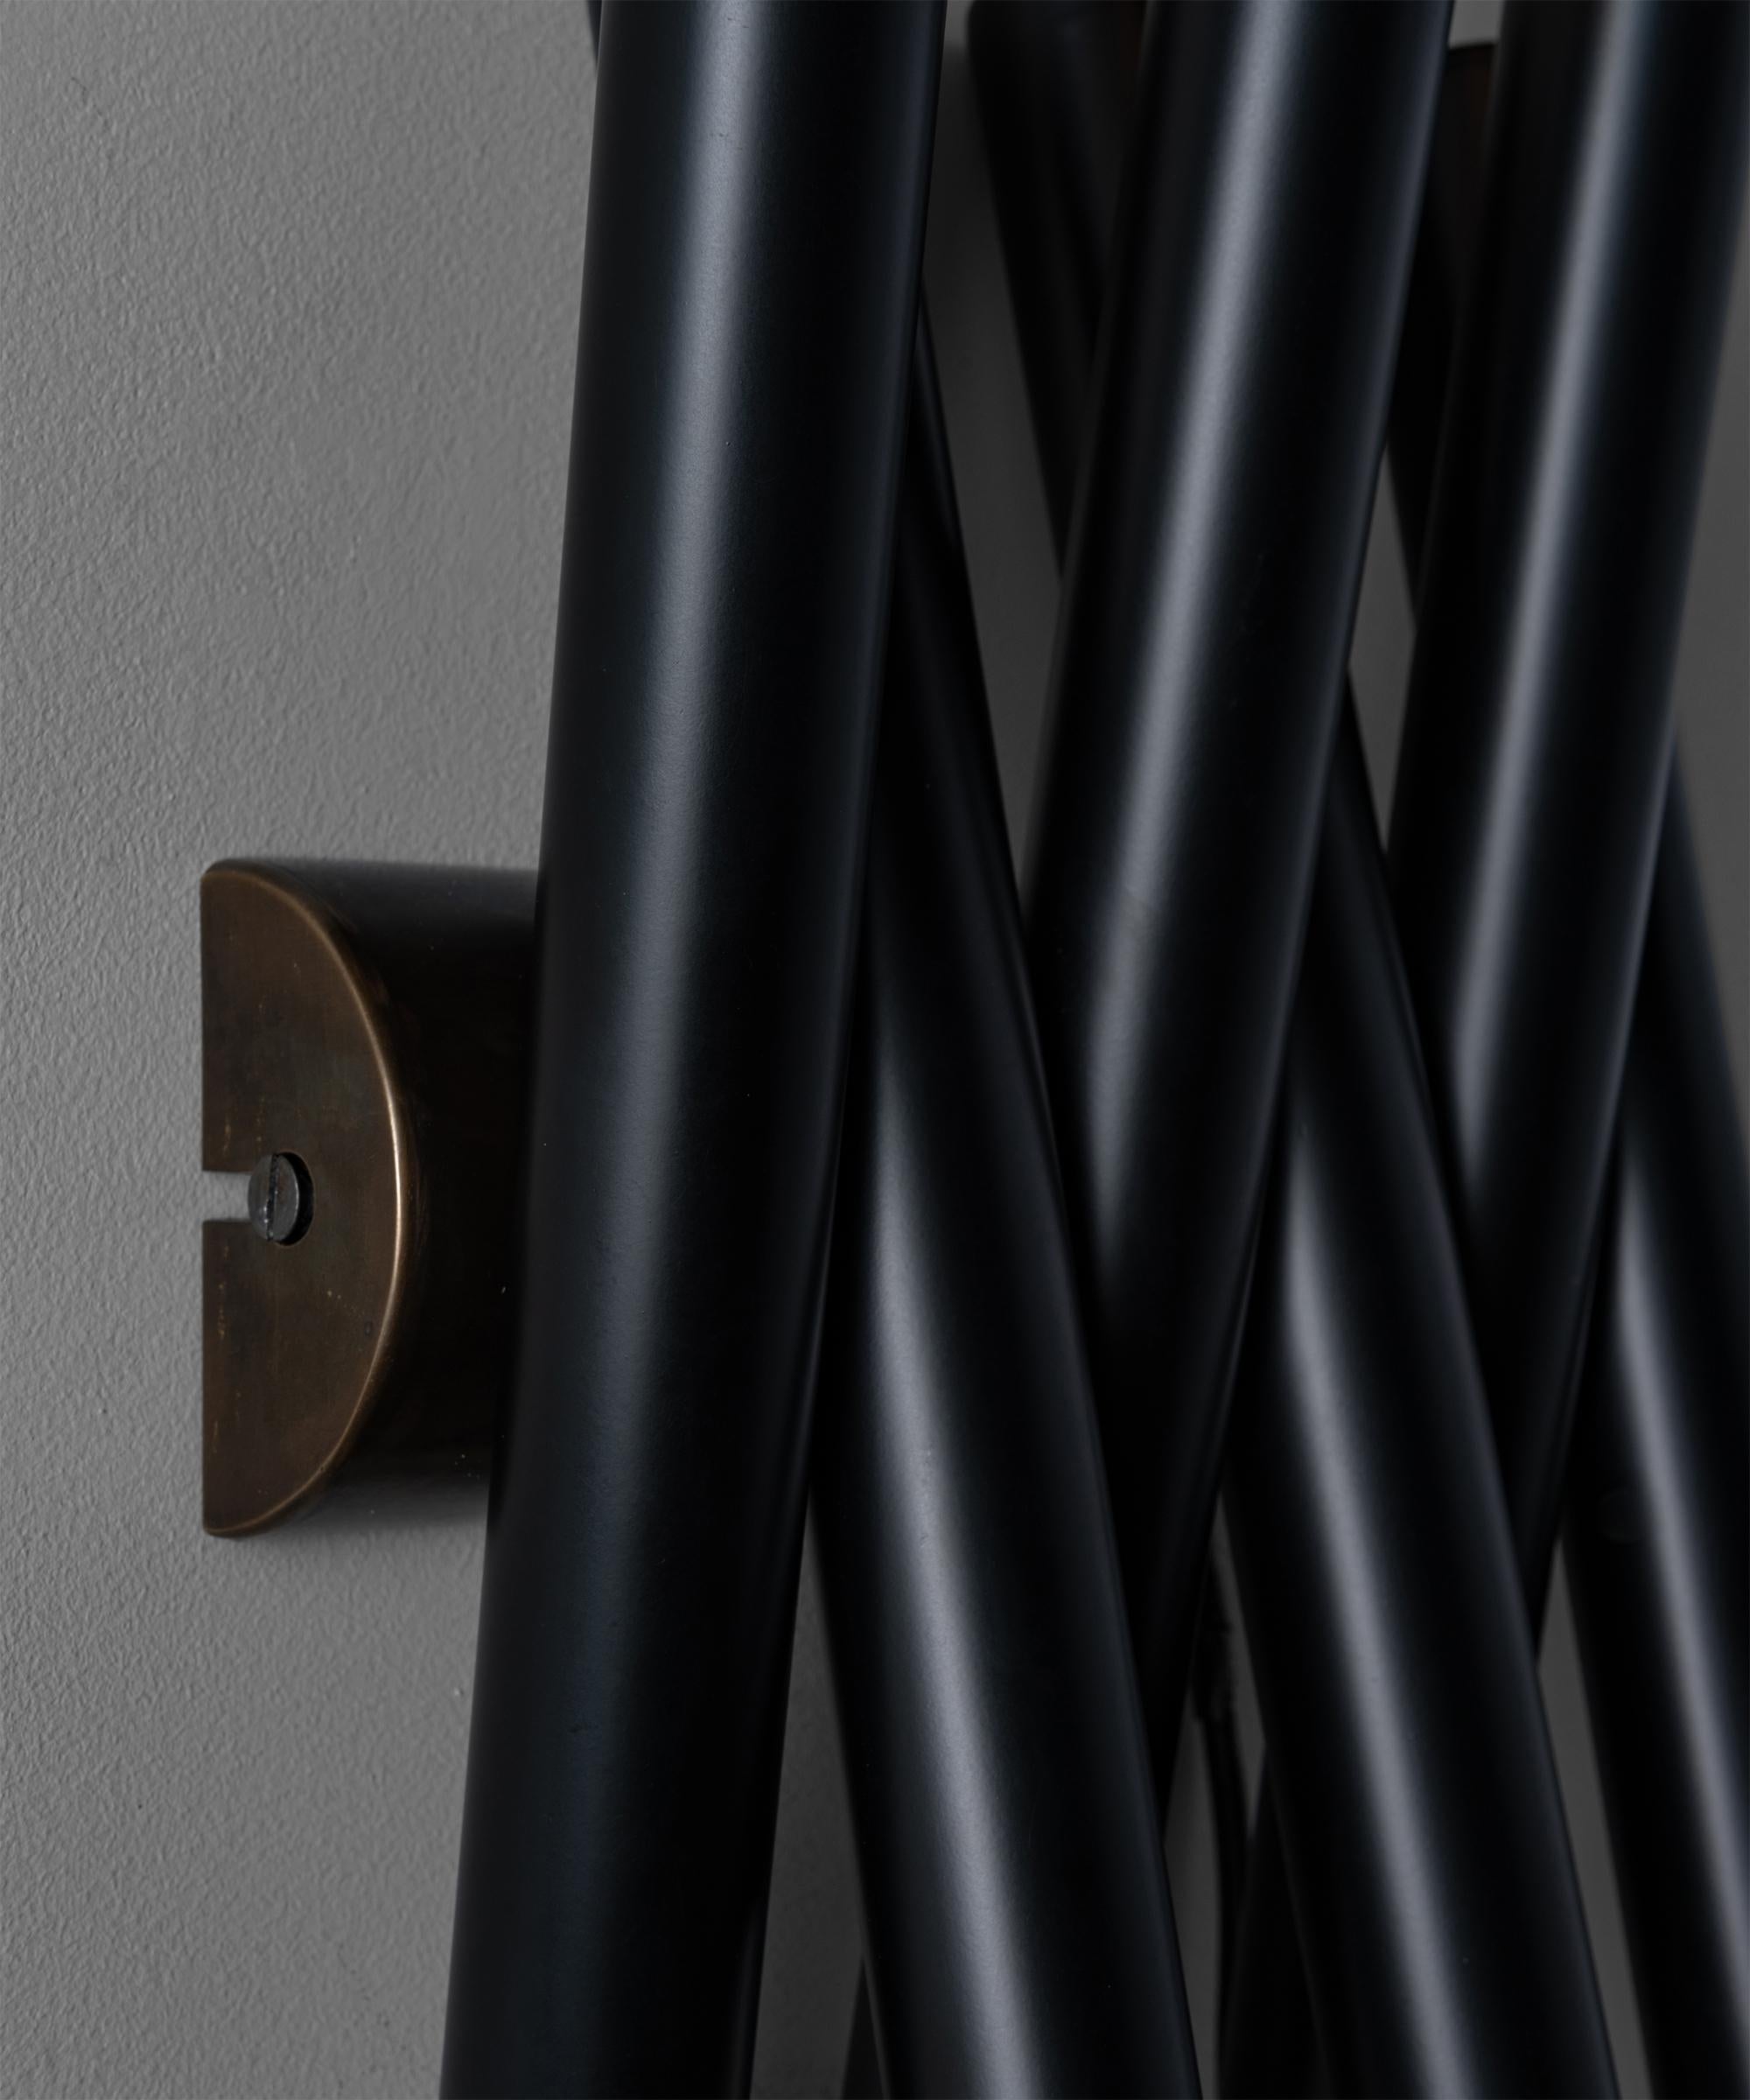 Painted Black Metal Tubular Wall Lights, Made in Italy For Sale